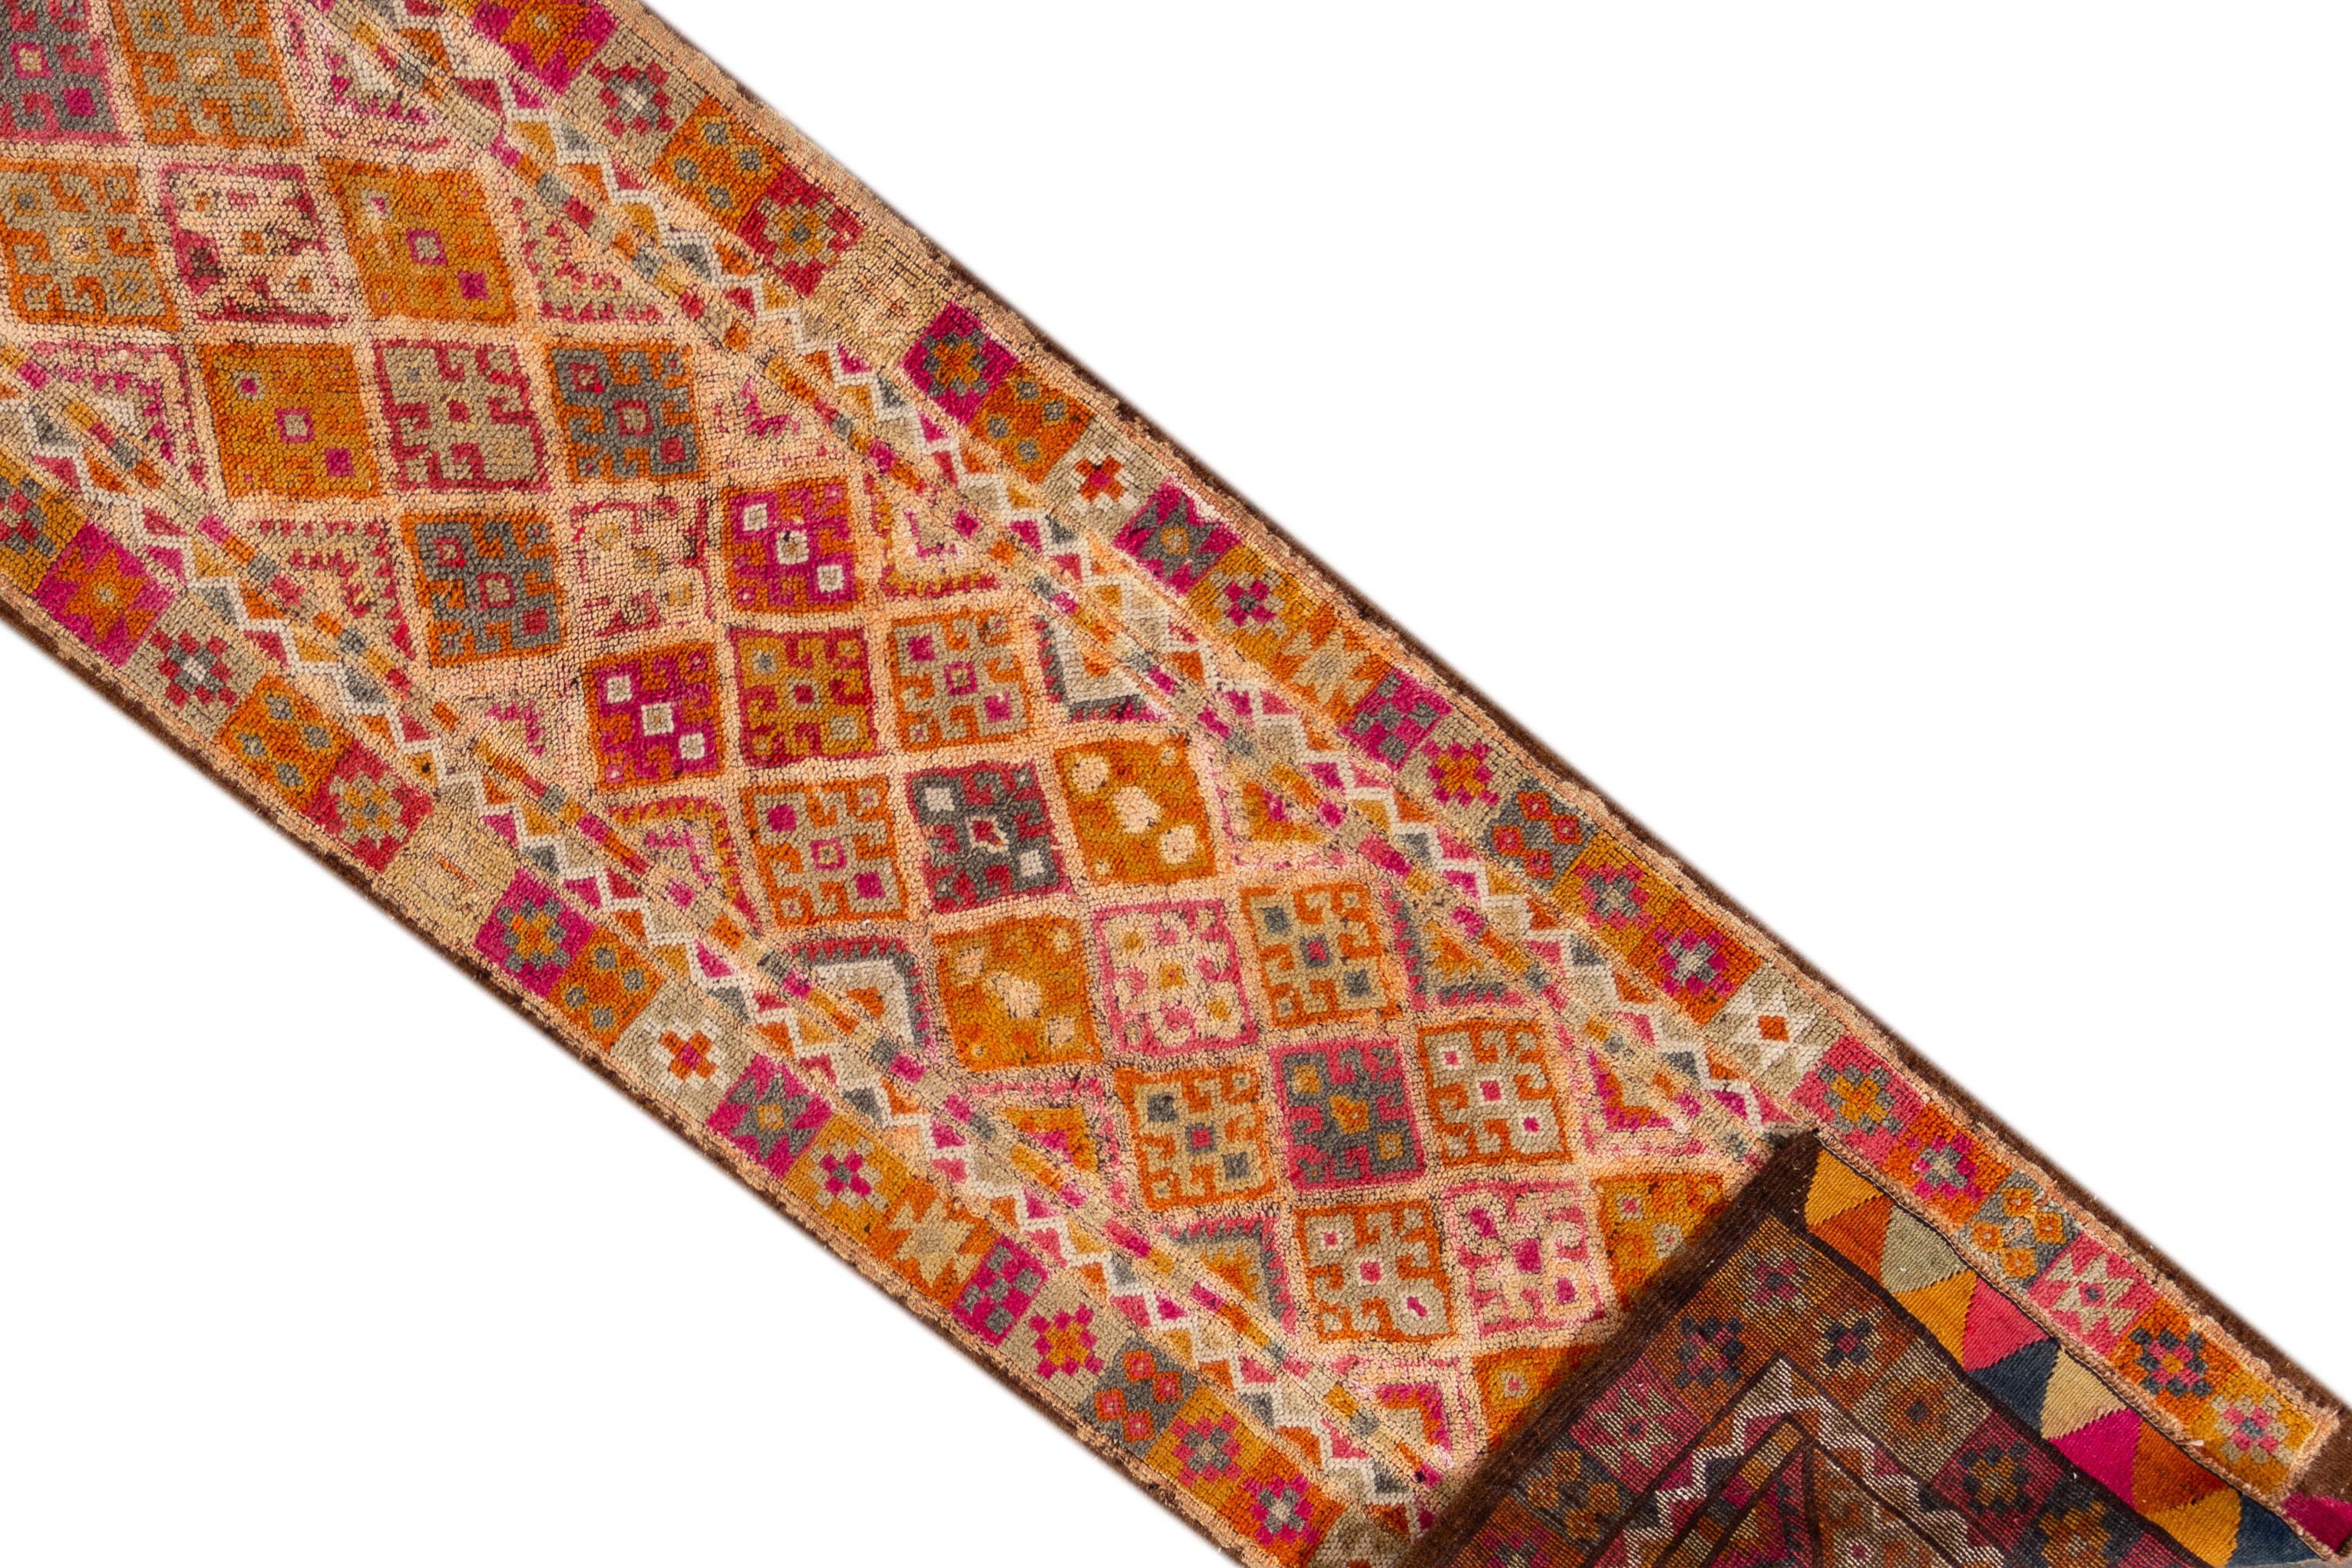 A 20th century vintage Turkish Anatolian runner rug with an all over geometric orange motif. This rug measures at 3'1